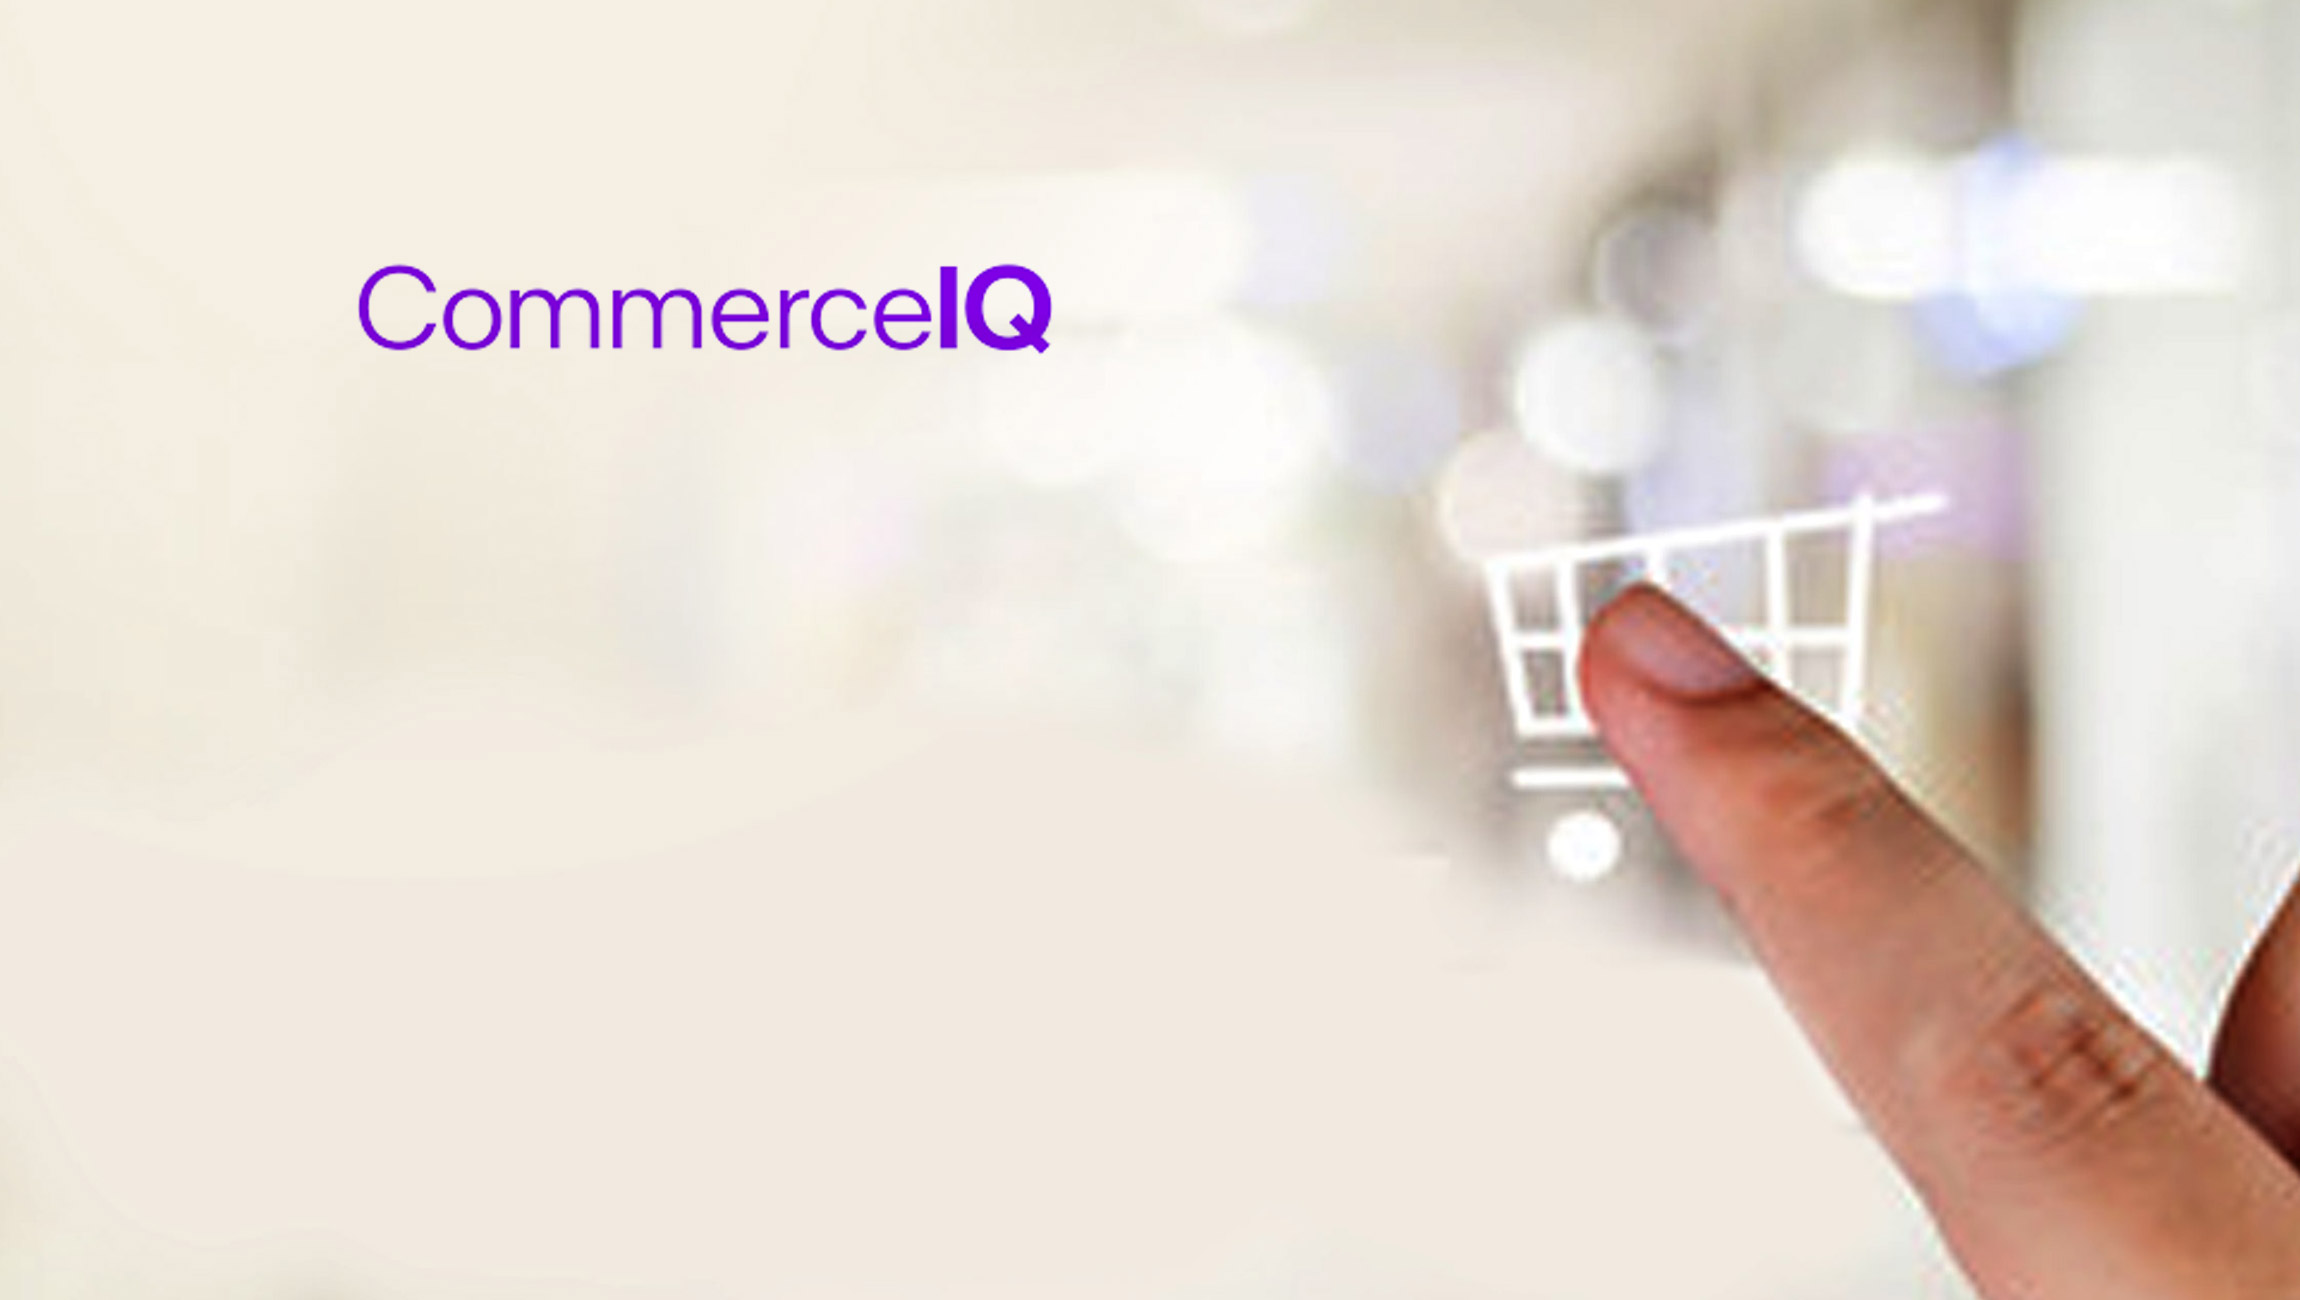 CommerceIQ Launches Global Retail Ecommerce Management Platform Combining Sales, Supply Chain, Retail Media, and Digital Shelf with e.fundamentals Acquisition